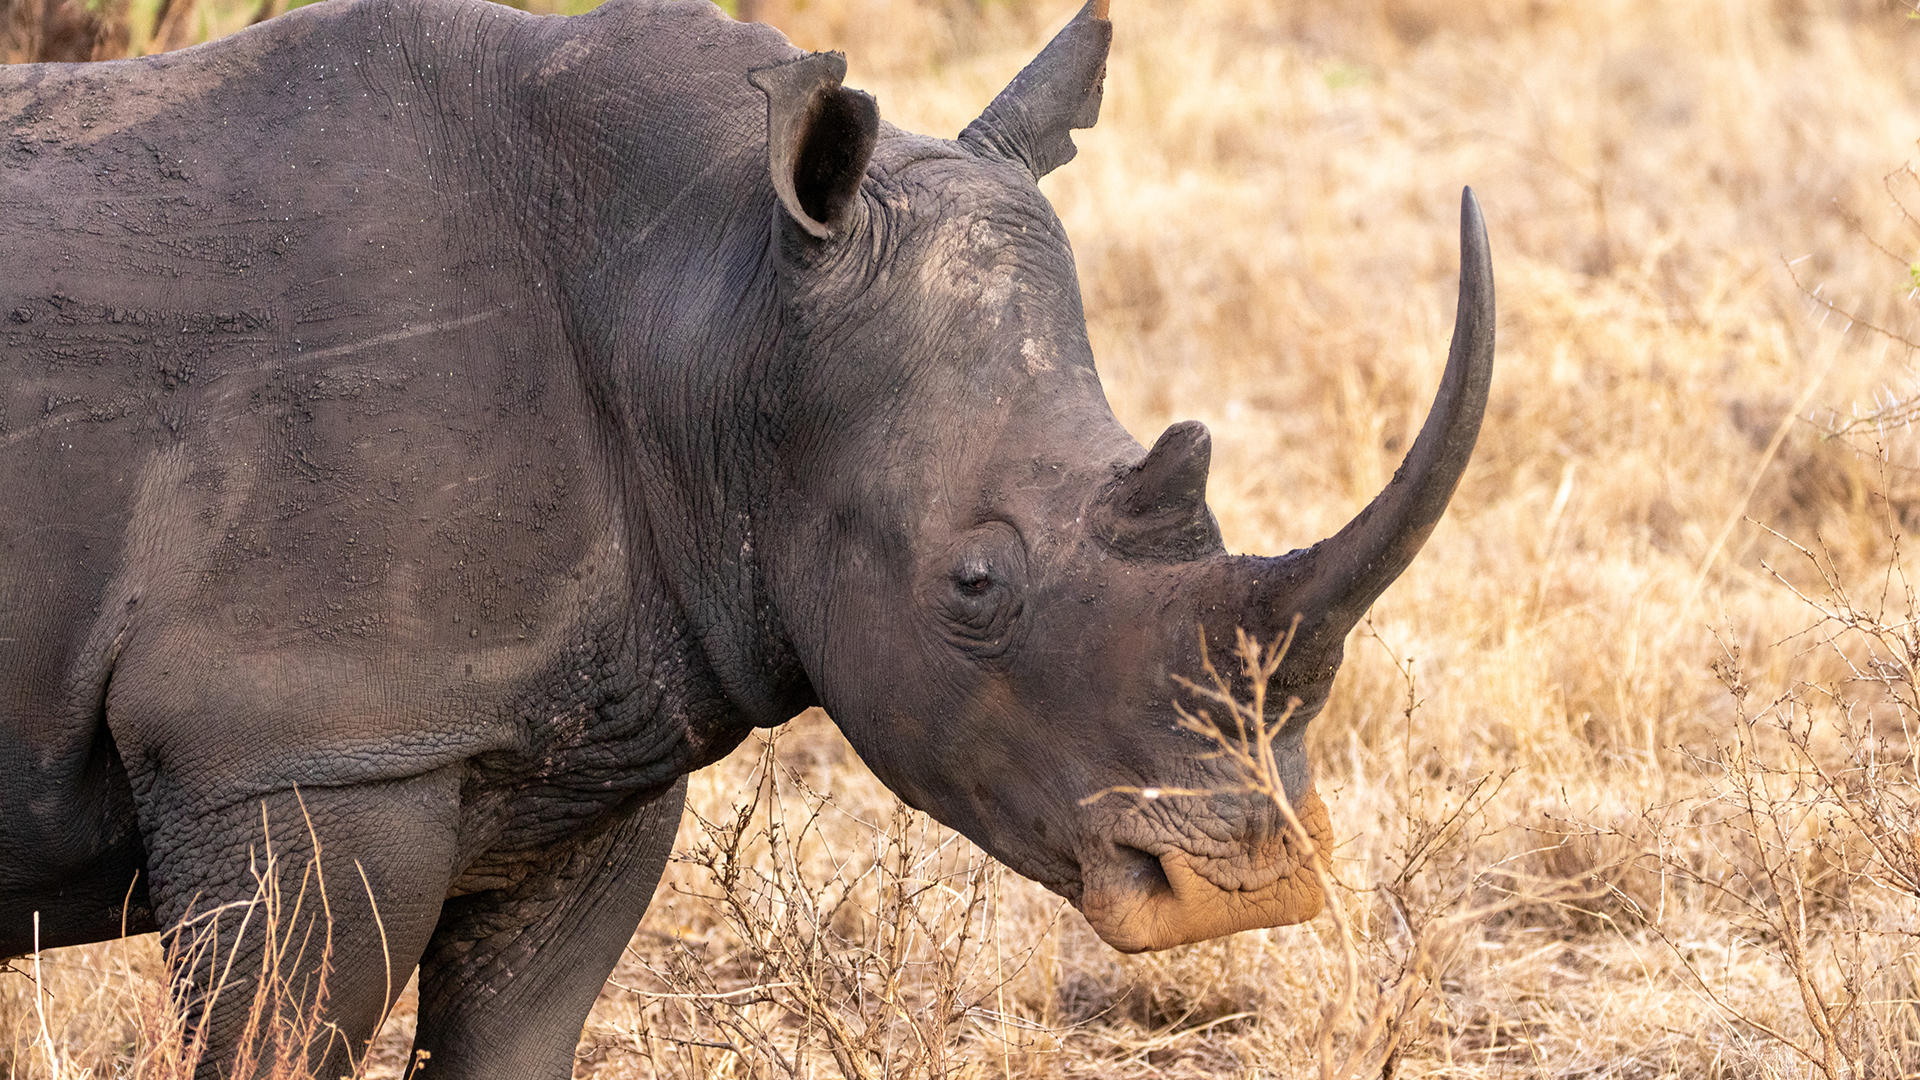 A rhino with large horn stands in dry grassland